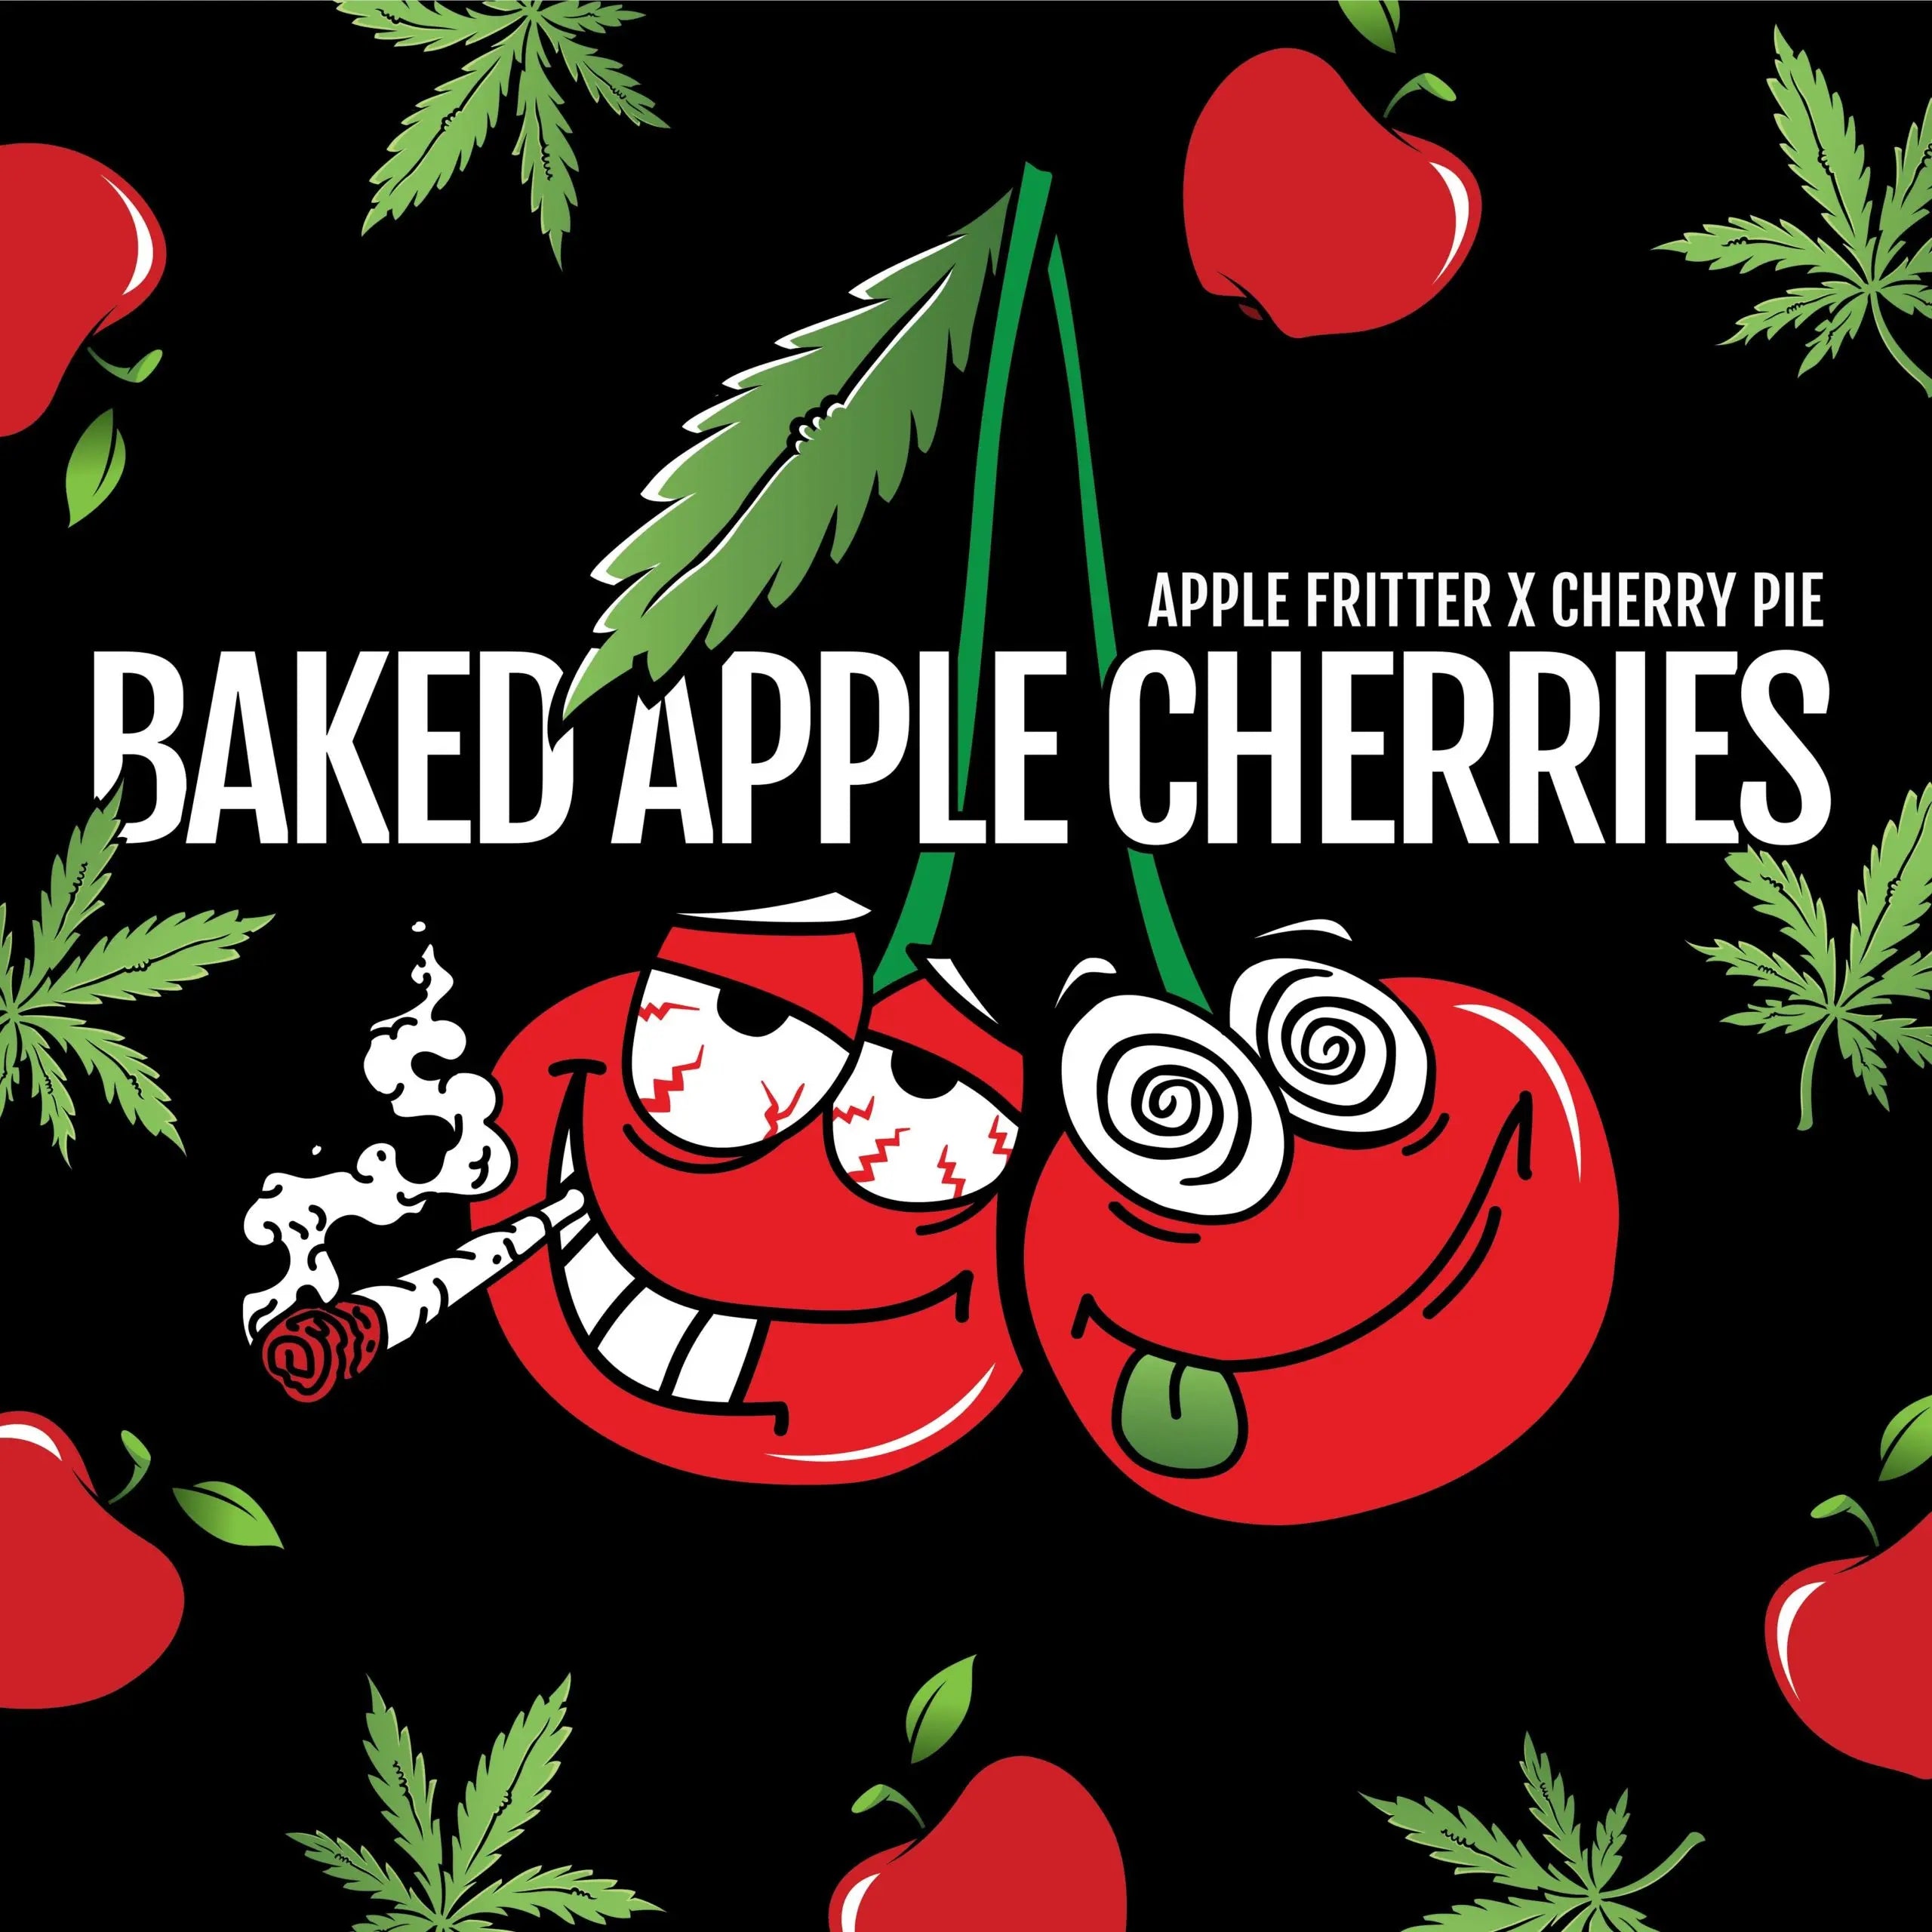 Baked Apple Cherries Feminized Cannabis Seeds By Elev8 Seeds Elev8 Seeds